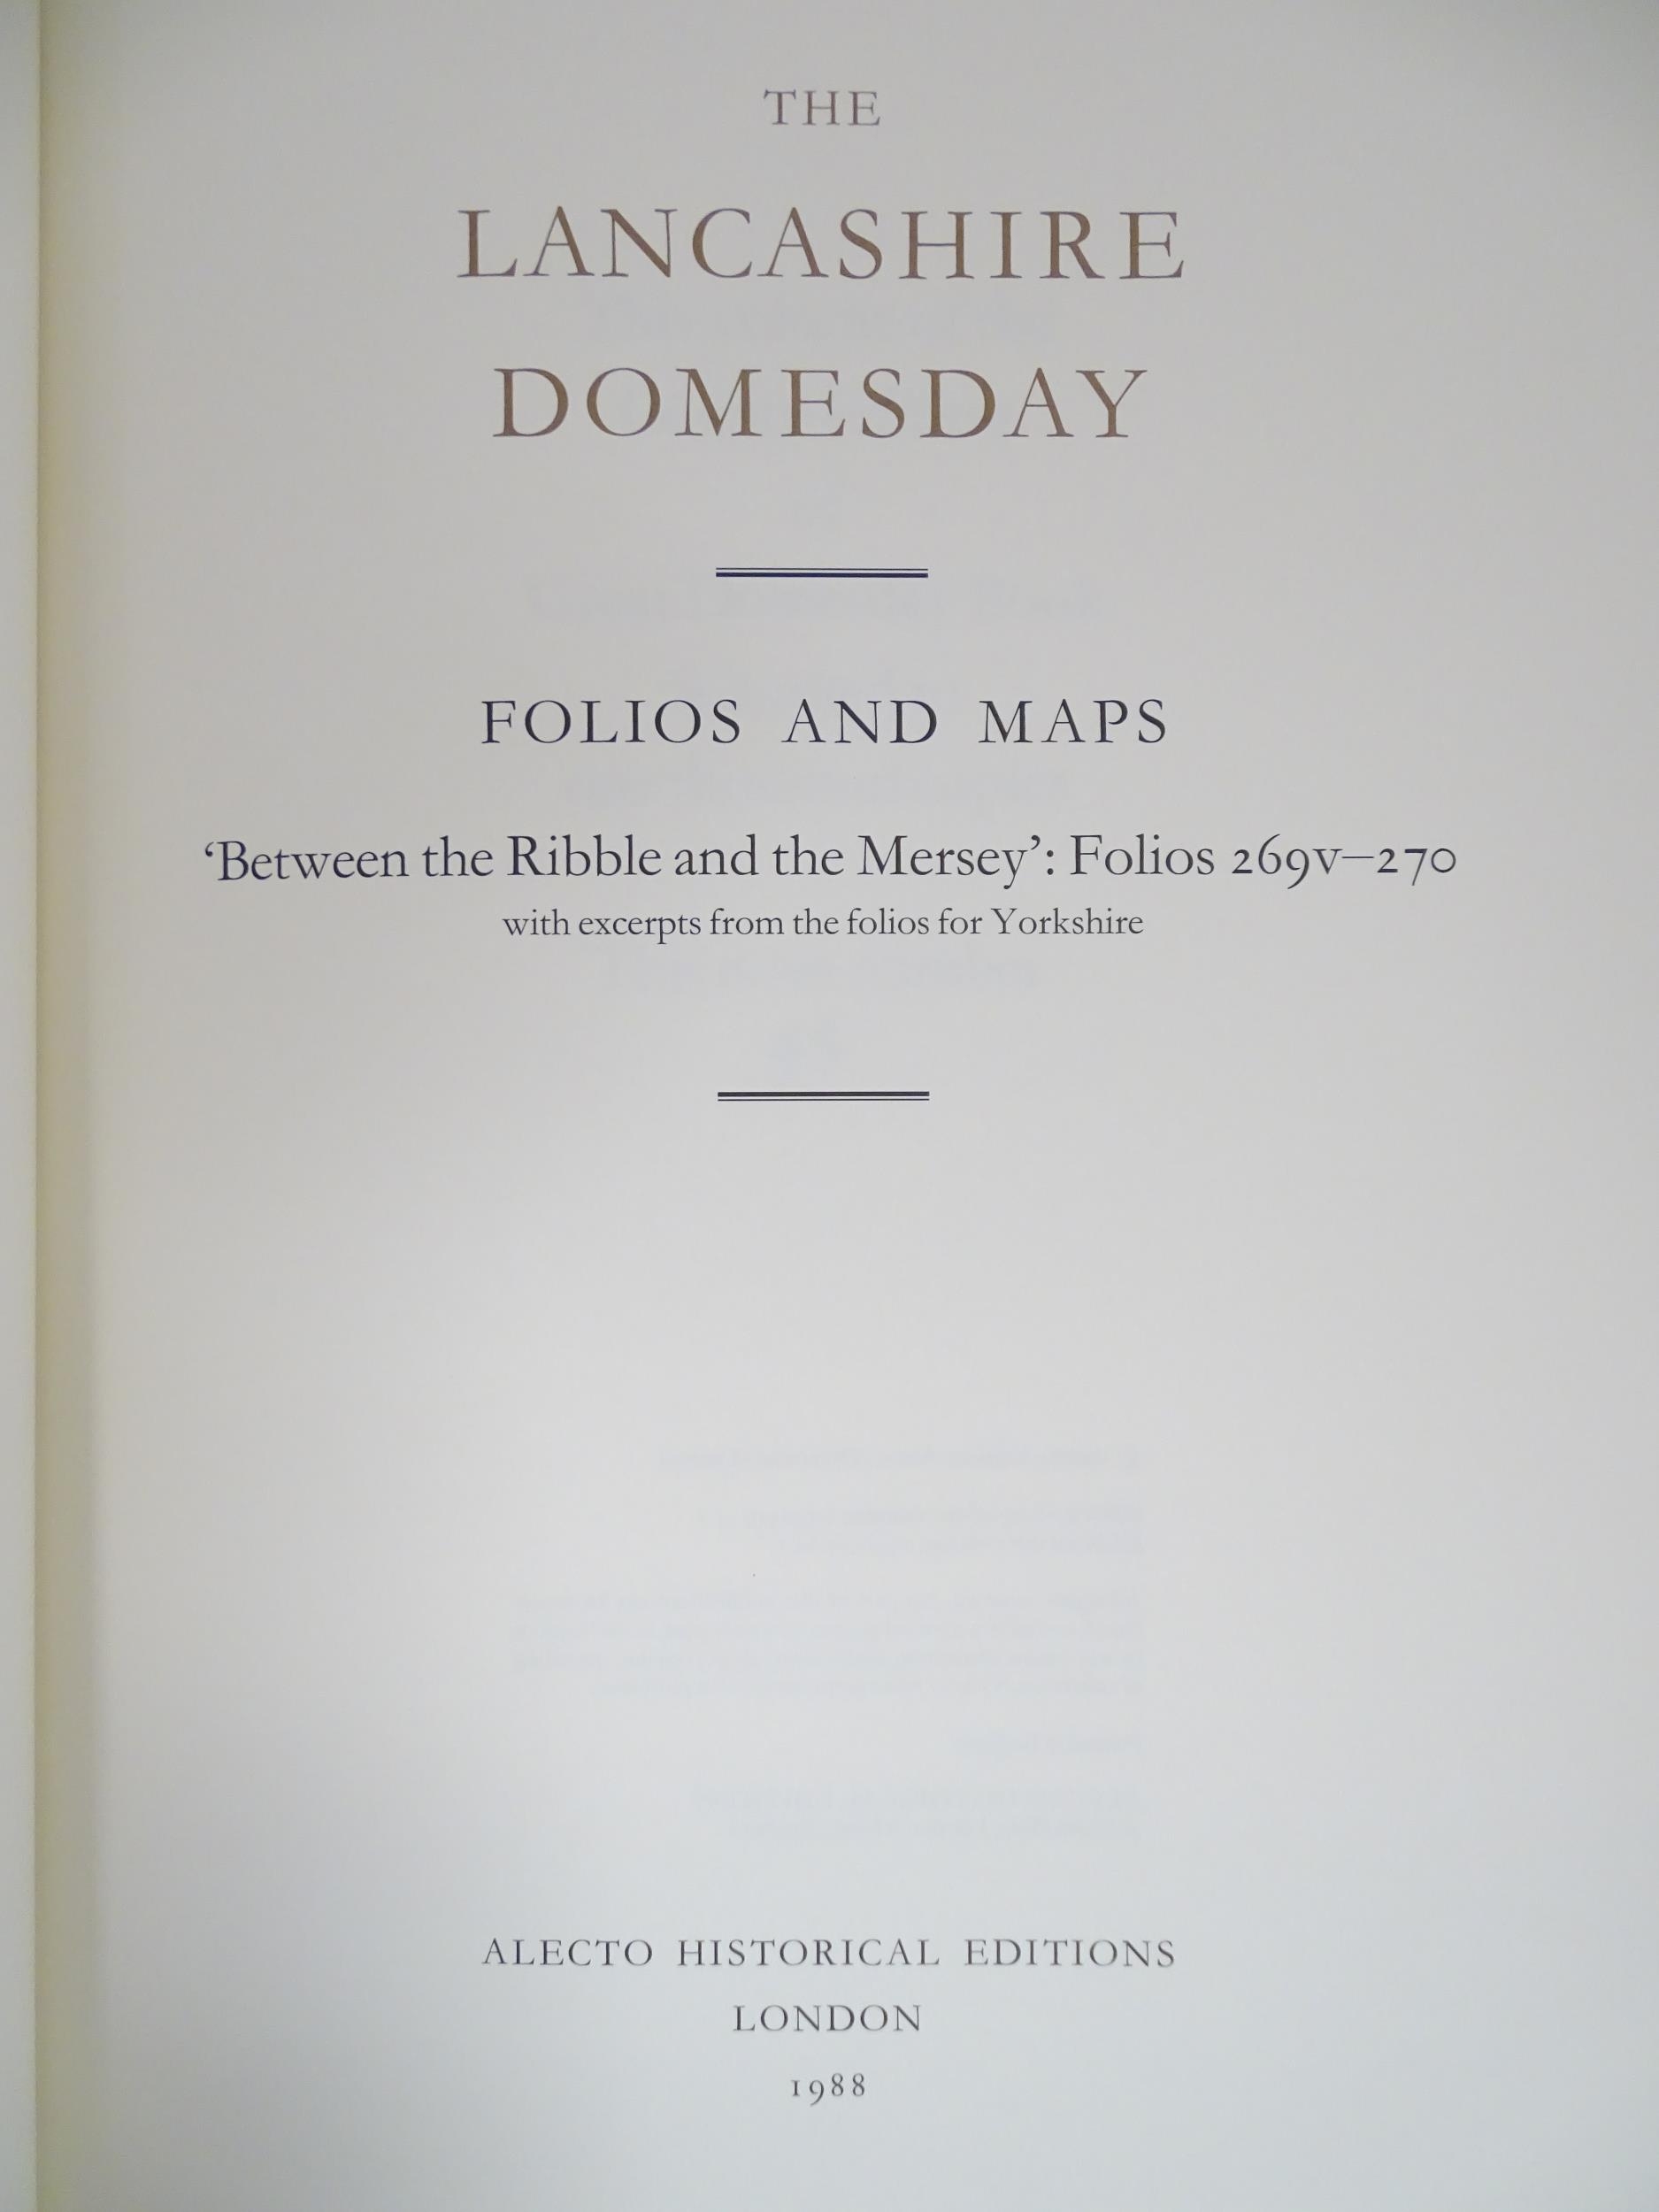 Books: The Lancashire Domesday, comprising Introduction & Translation, Studies, and Folios & Maps. - Image 7 of 15